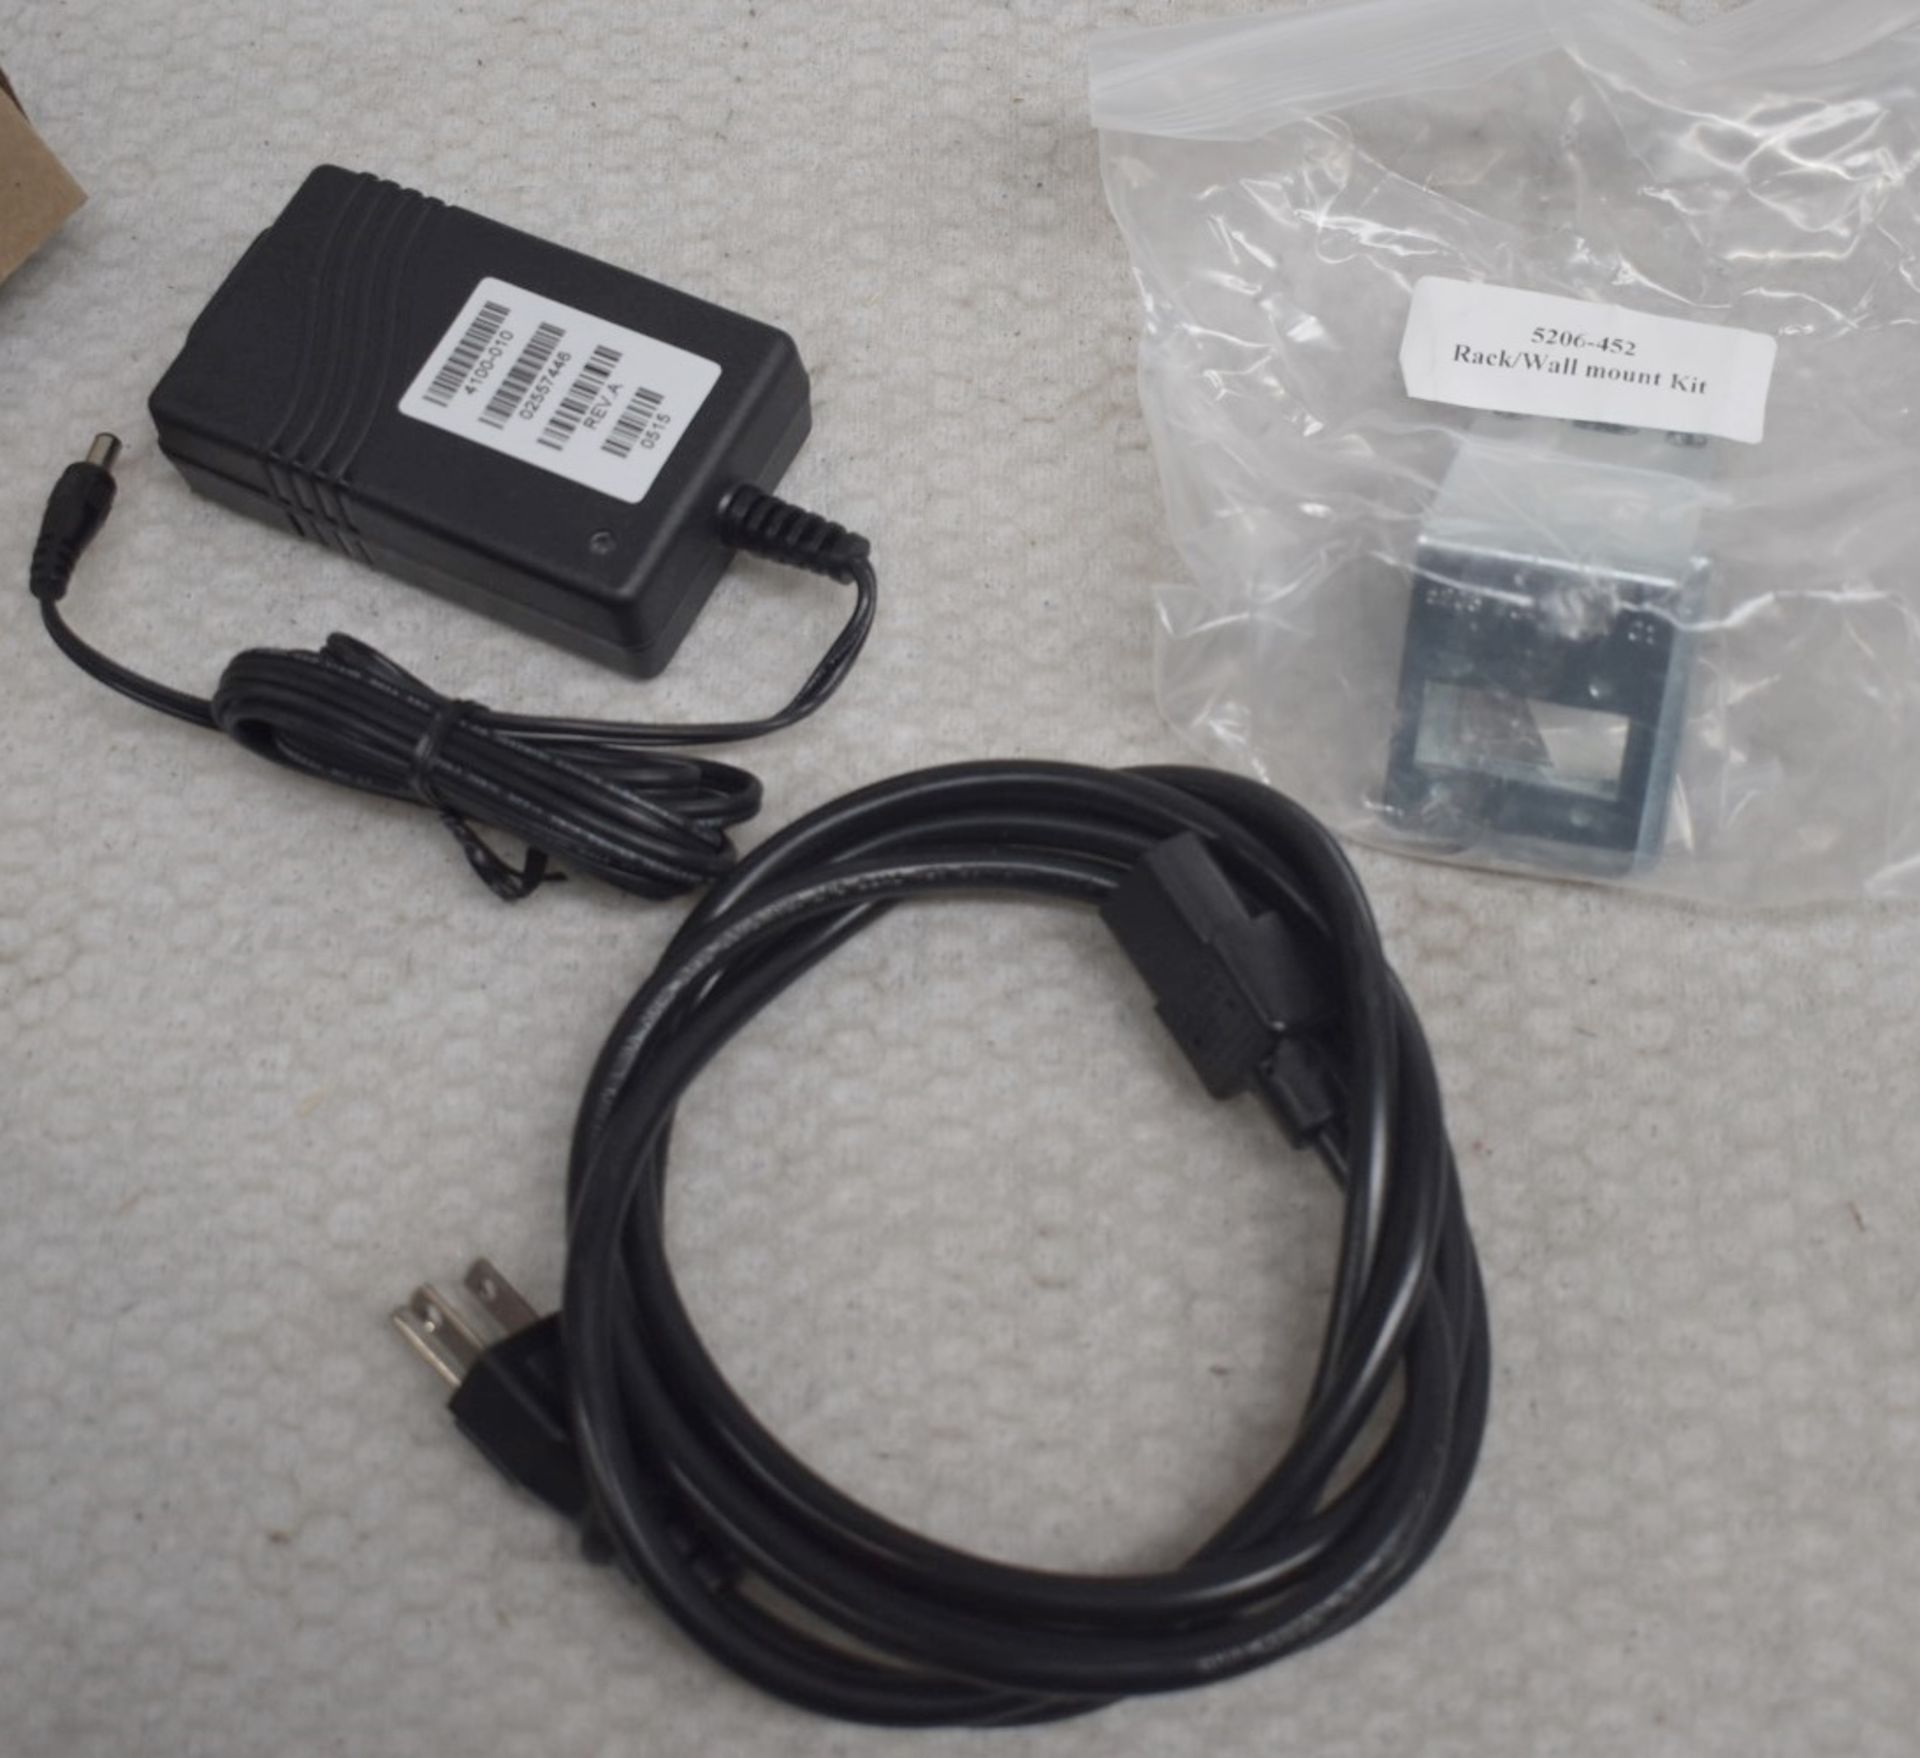 1 x TELLABS 8815 Multi-Service Access Node - Includes PSU, Manual & Software - Guide Price £1, - Image 8 of 9